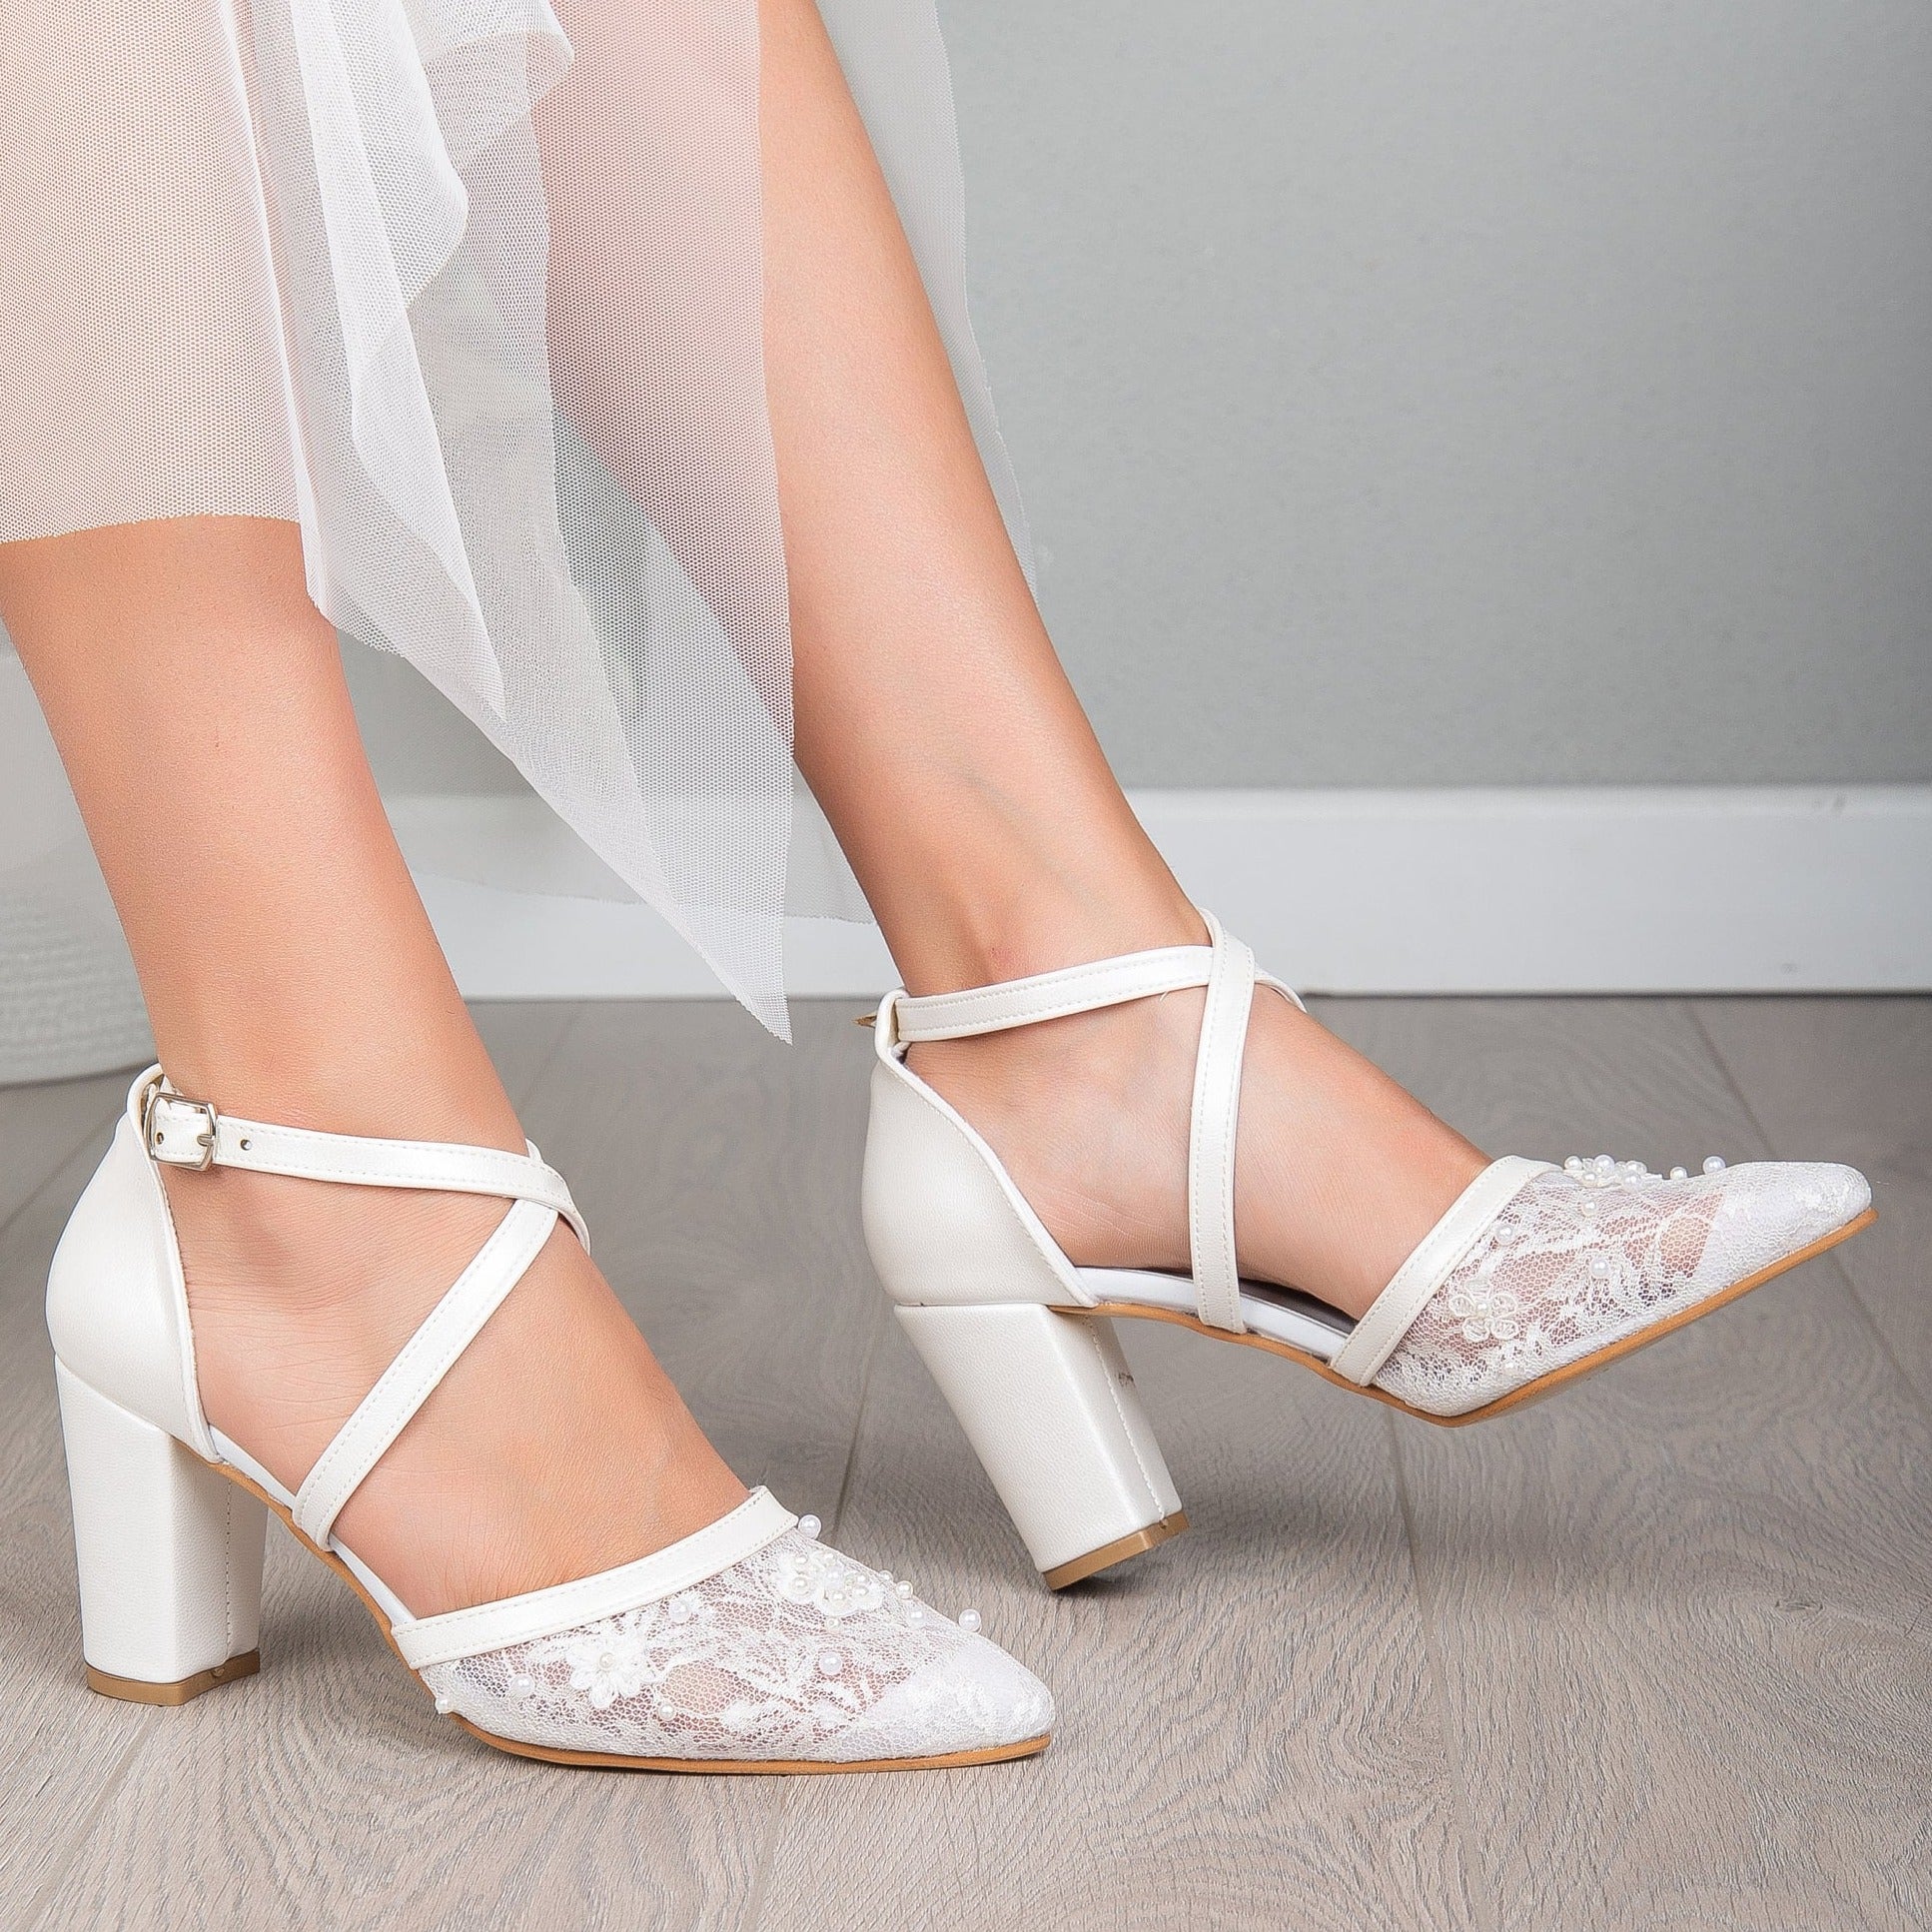 Pearls Lace Pointed Toe White High Heels Wedding Bridal Shoes, S016 –  OkBridal